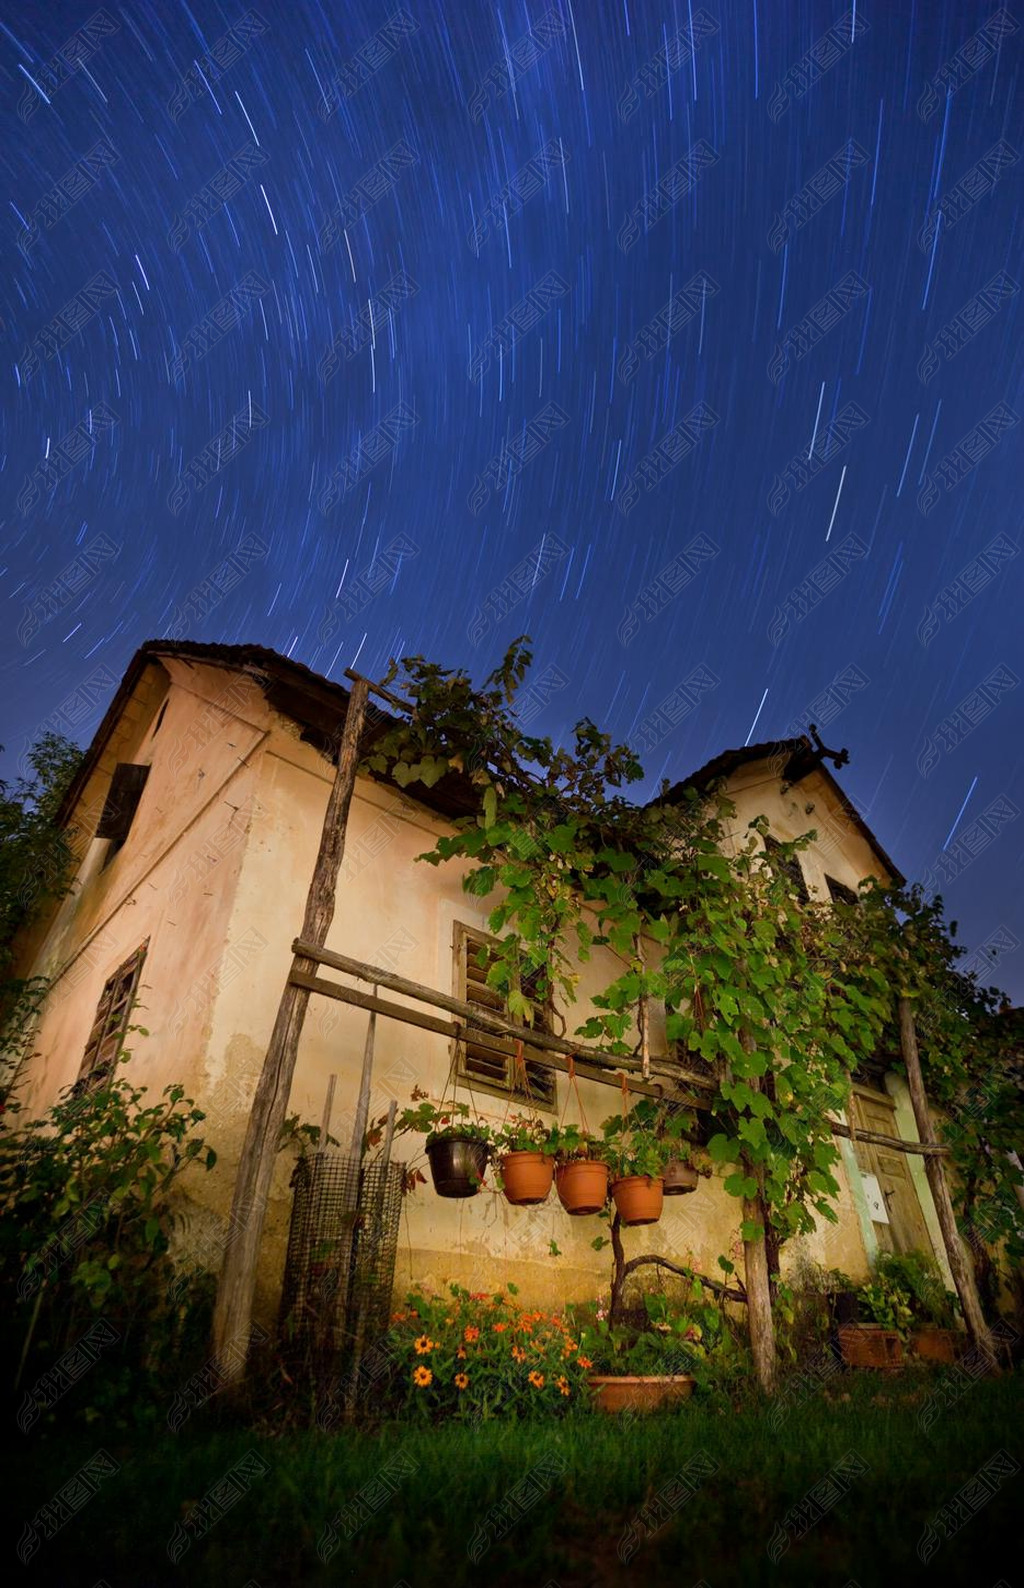 Old house with star trails